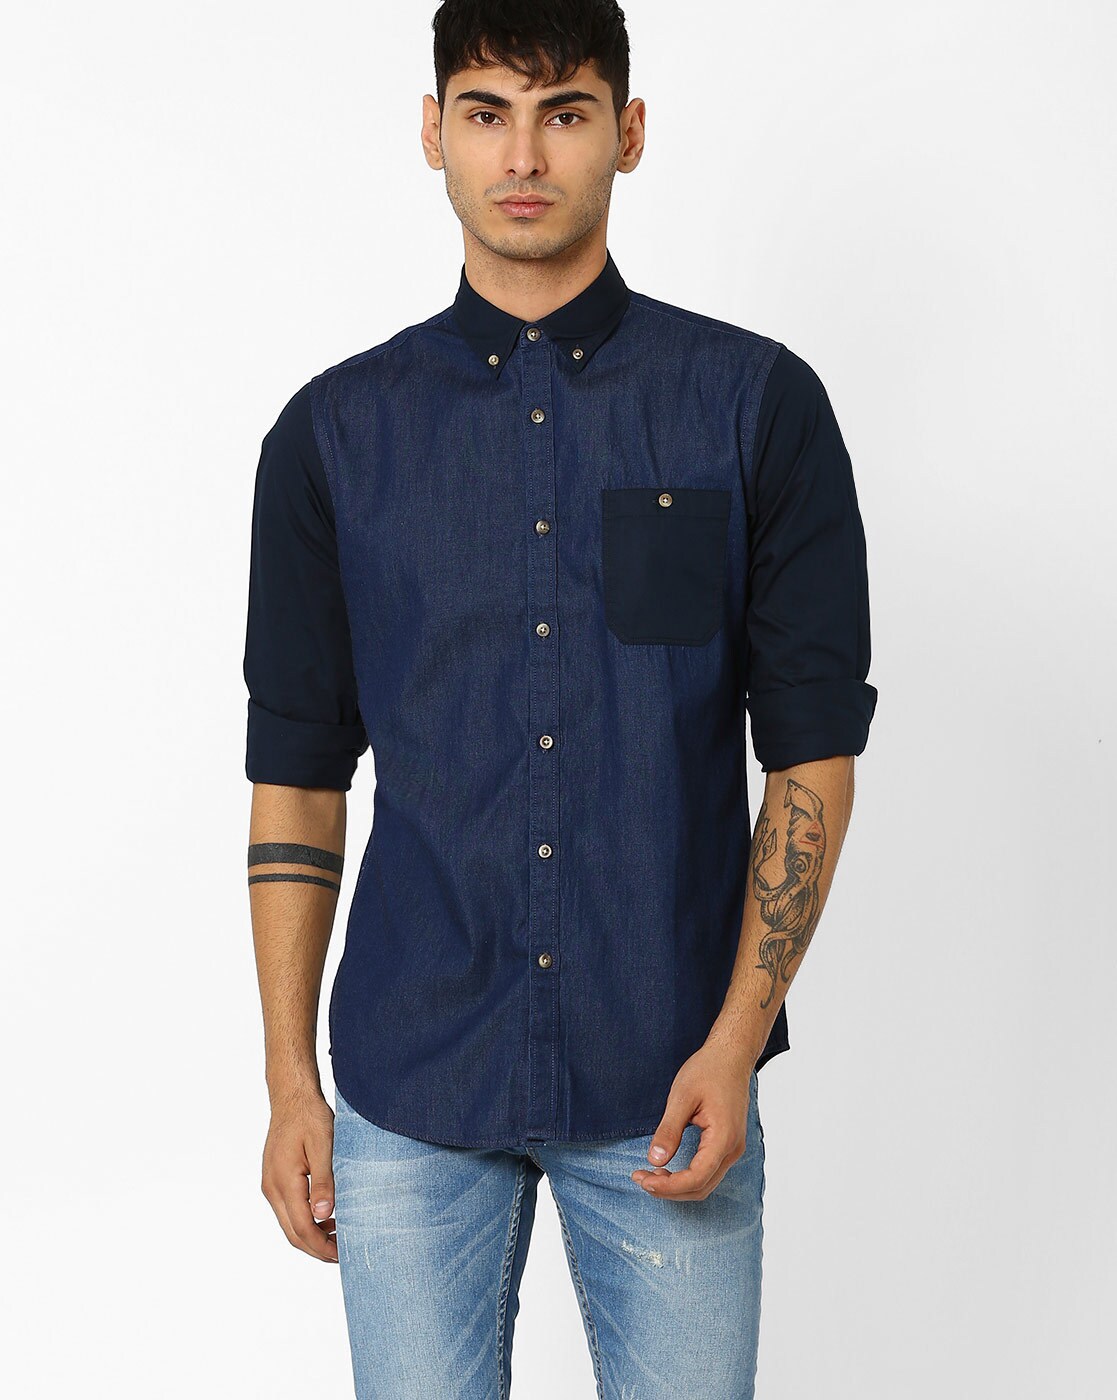 Denim Shirt Male Fashion A Classic Style That Suits Every Guy – Shahzeb  Saeed